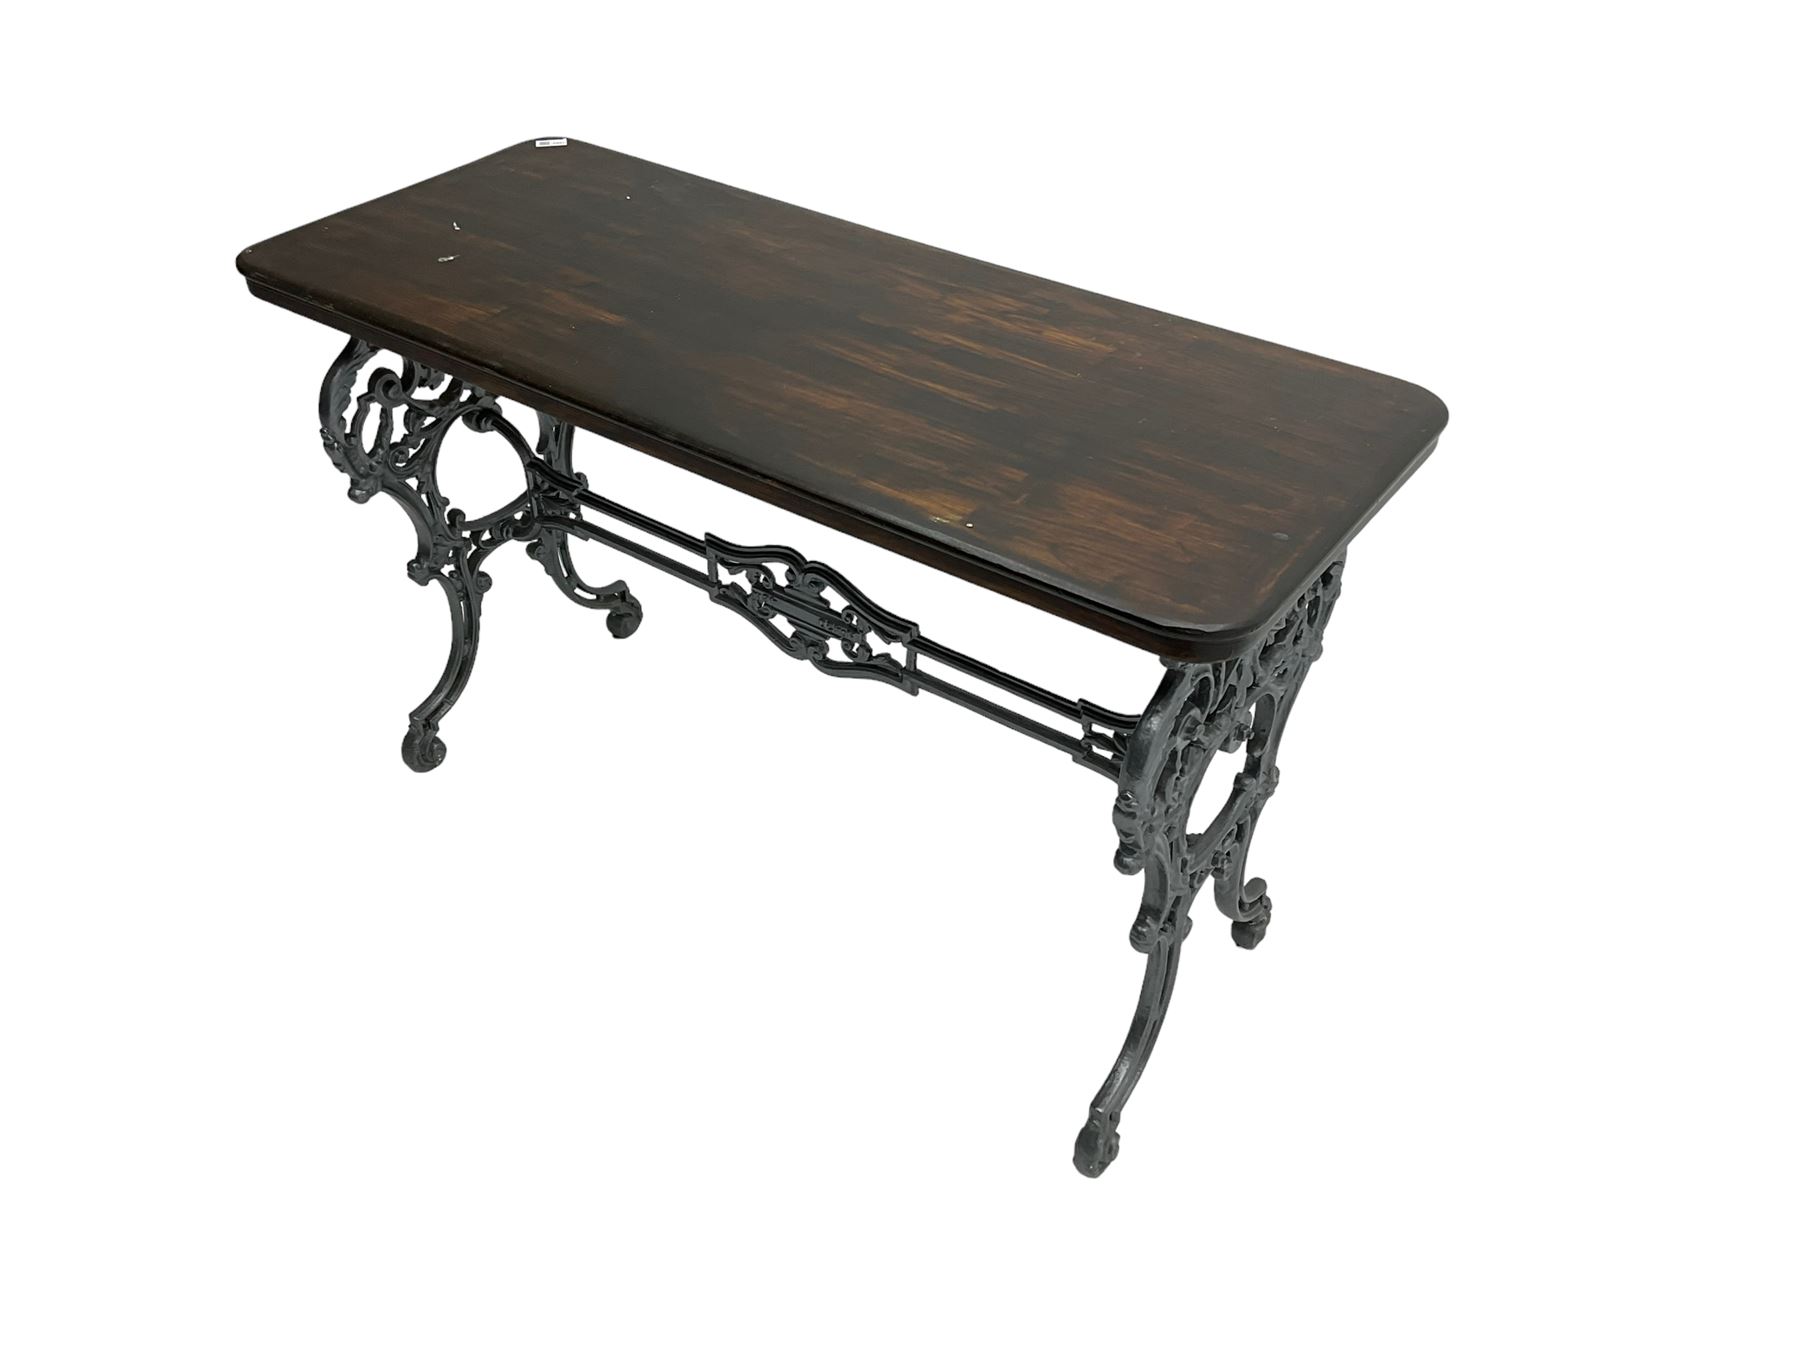 The Louis - late 19th century French design cast iron table - Image 8 of 9